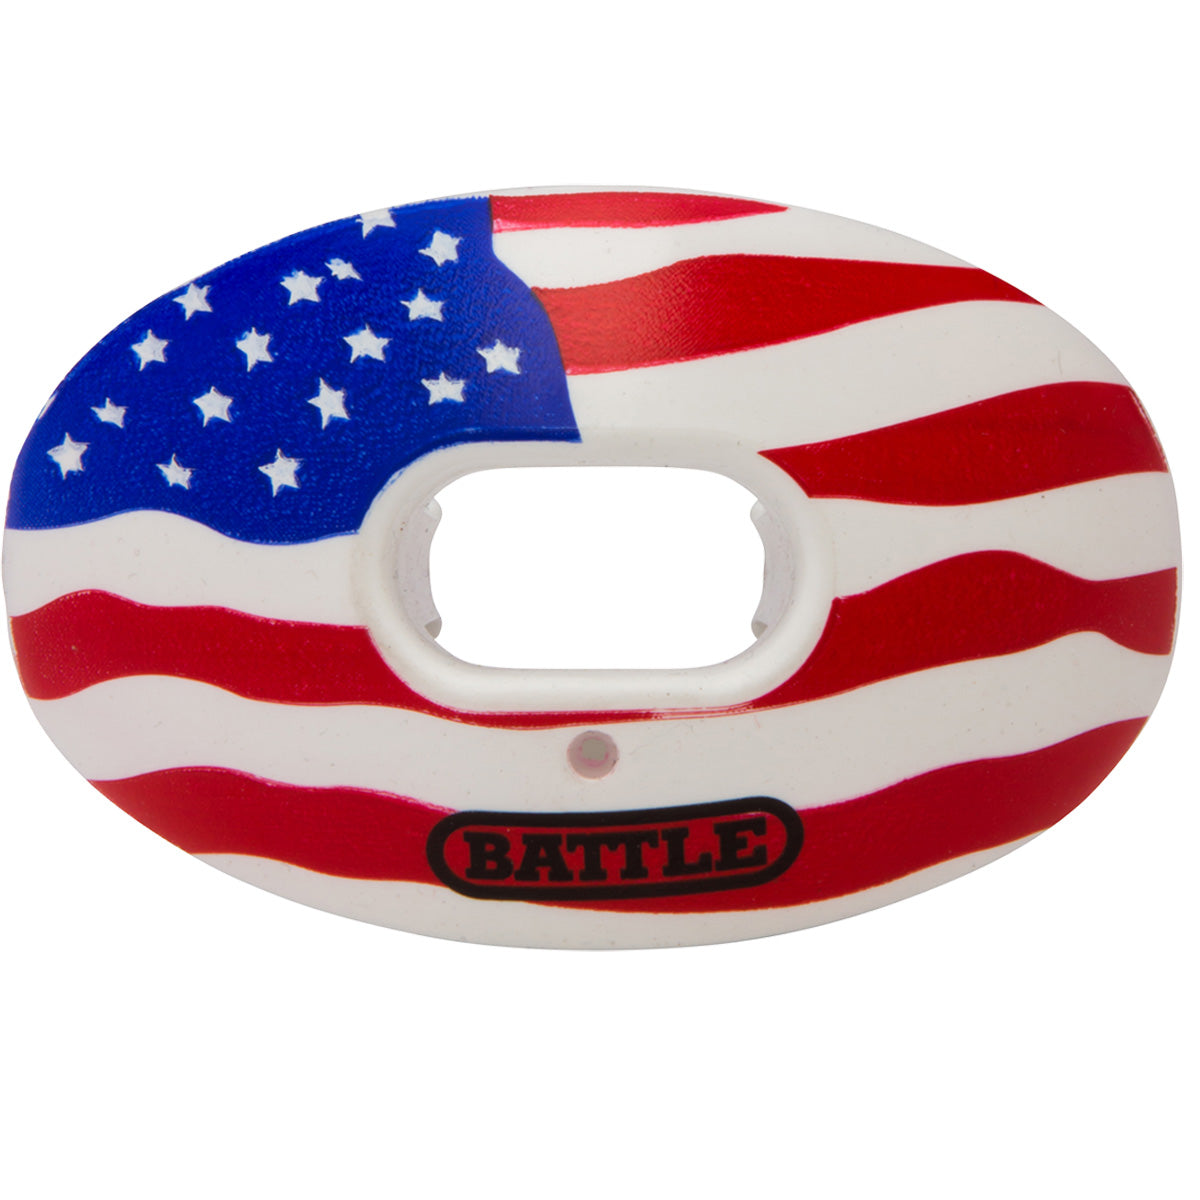 Battle Sports Limited Edition Oxygen Lip Protector Mouthguard - USA Flag Battle Sports